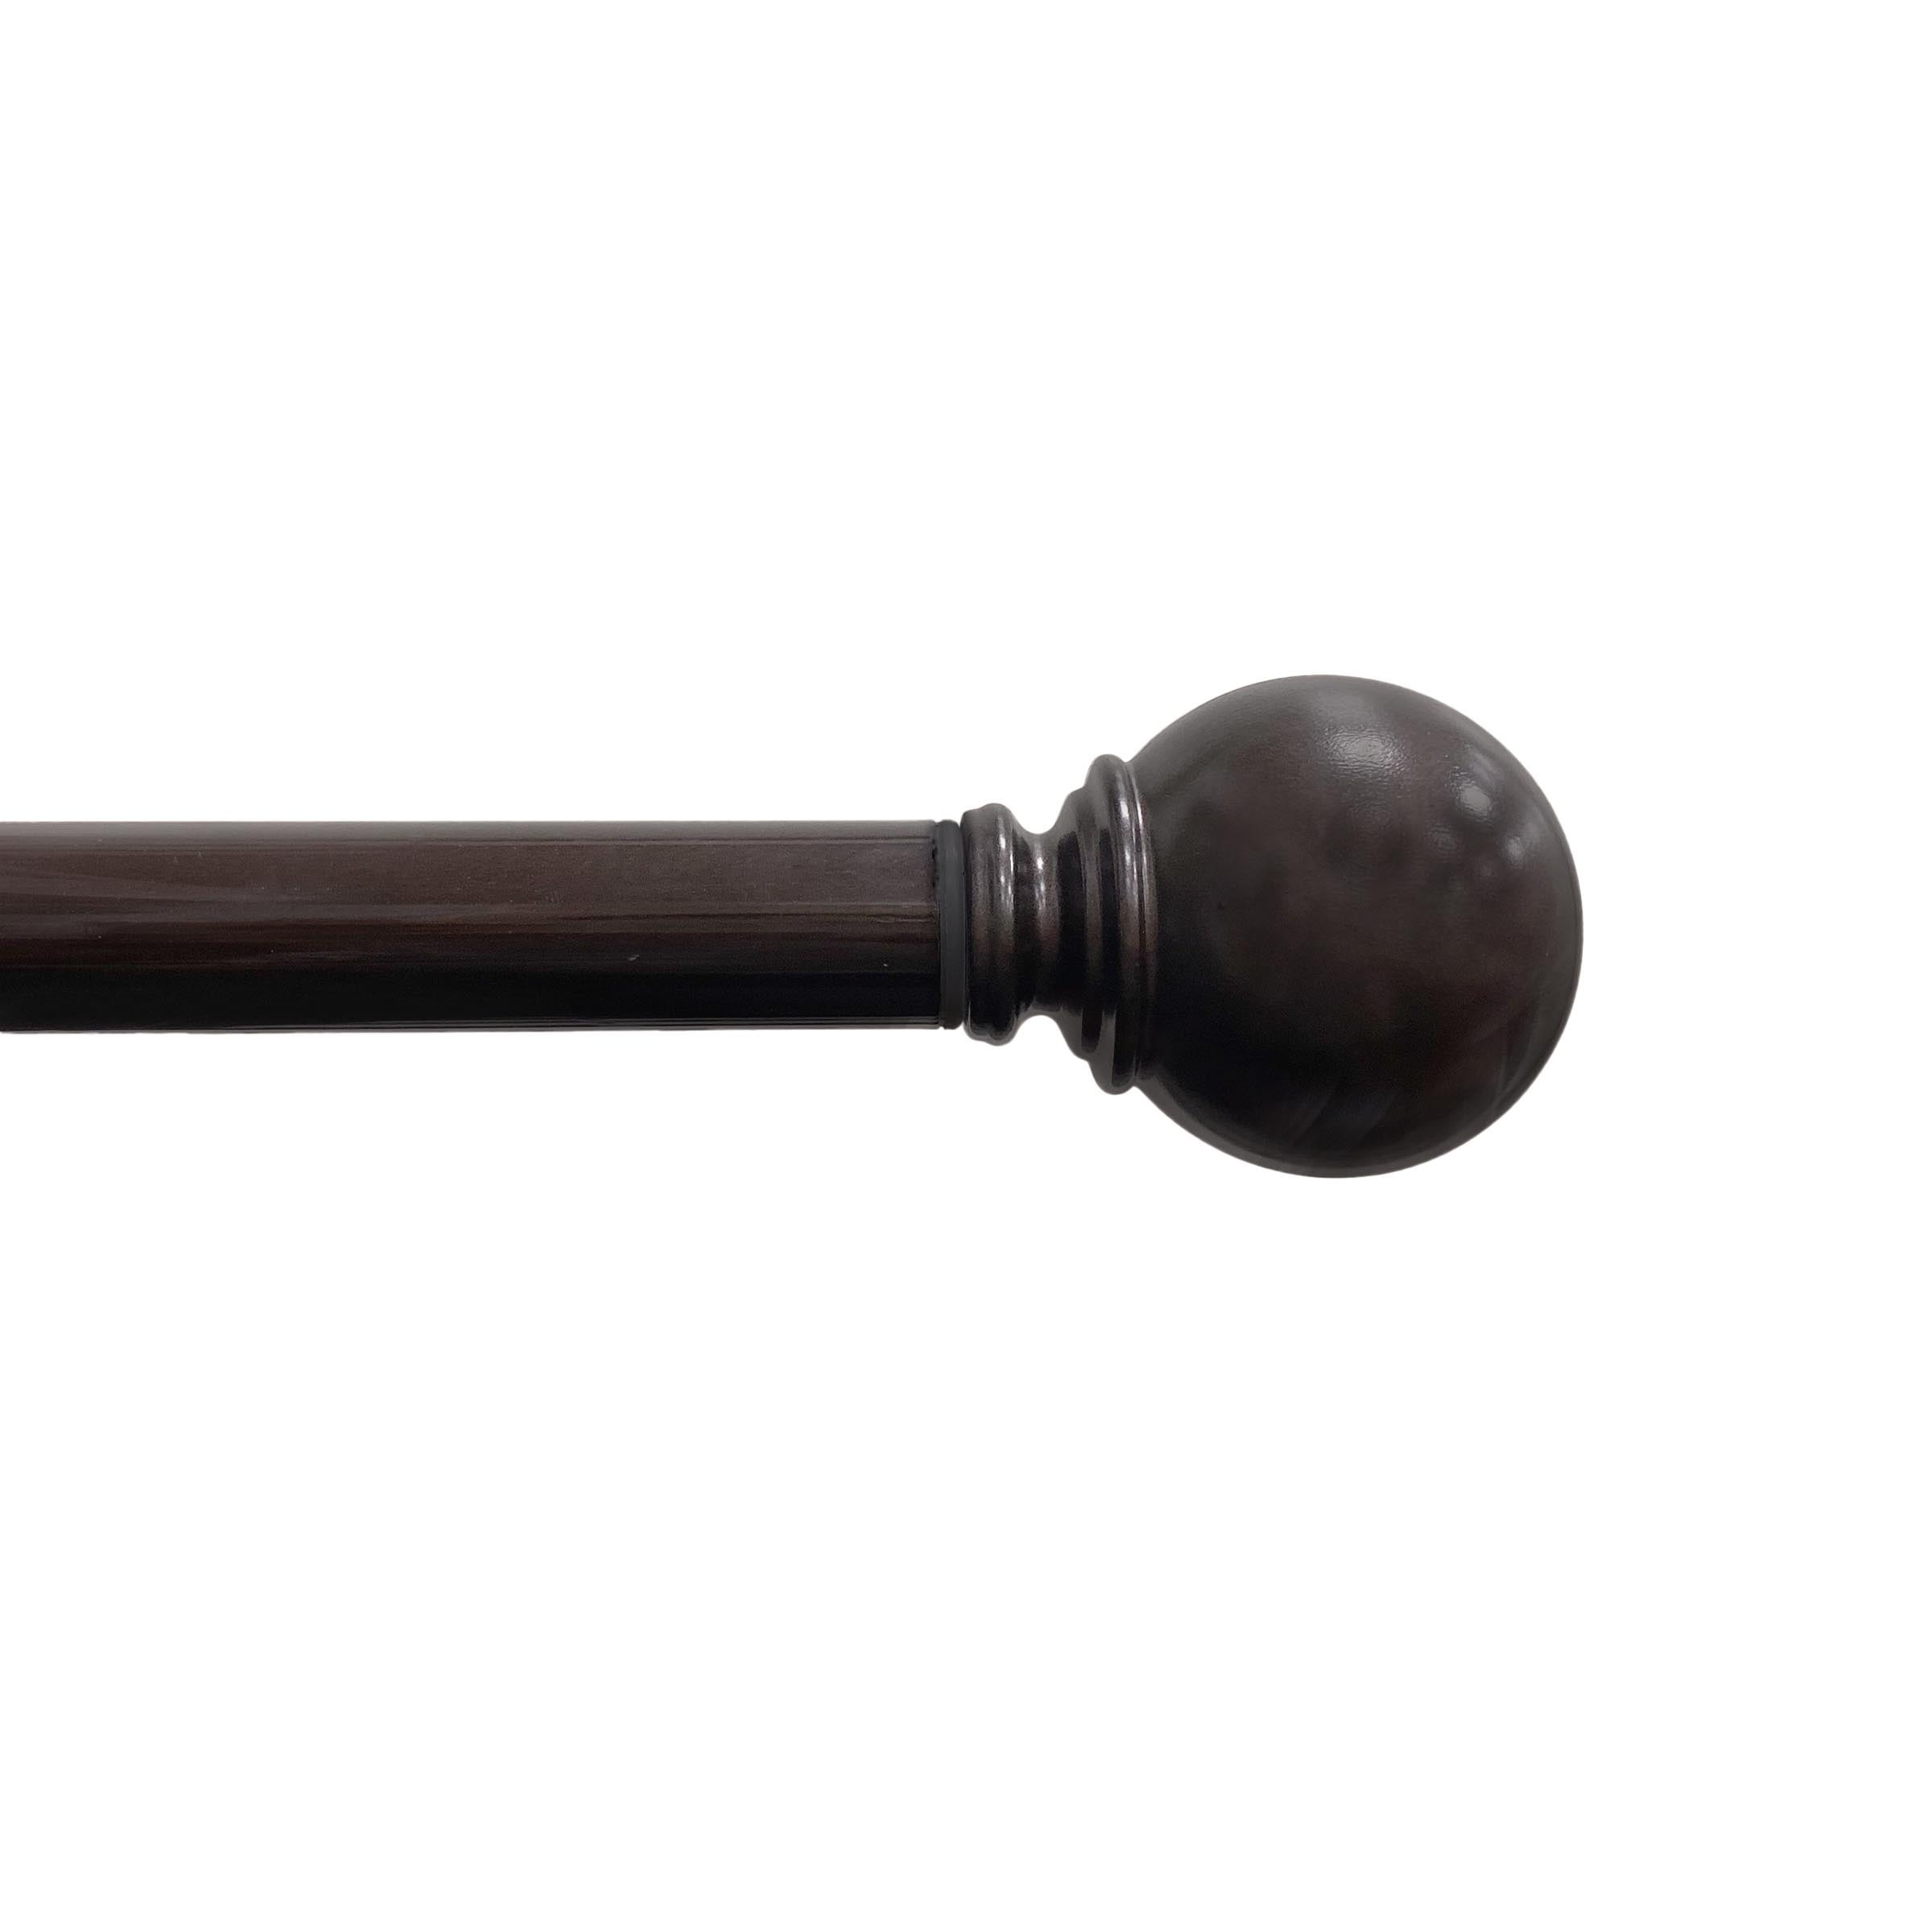 2-PK Home Decorators Mix  Match 1 in Ball Curtain Rod Final Oil Rubbed Bronze 